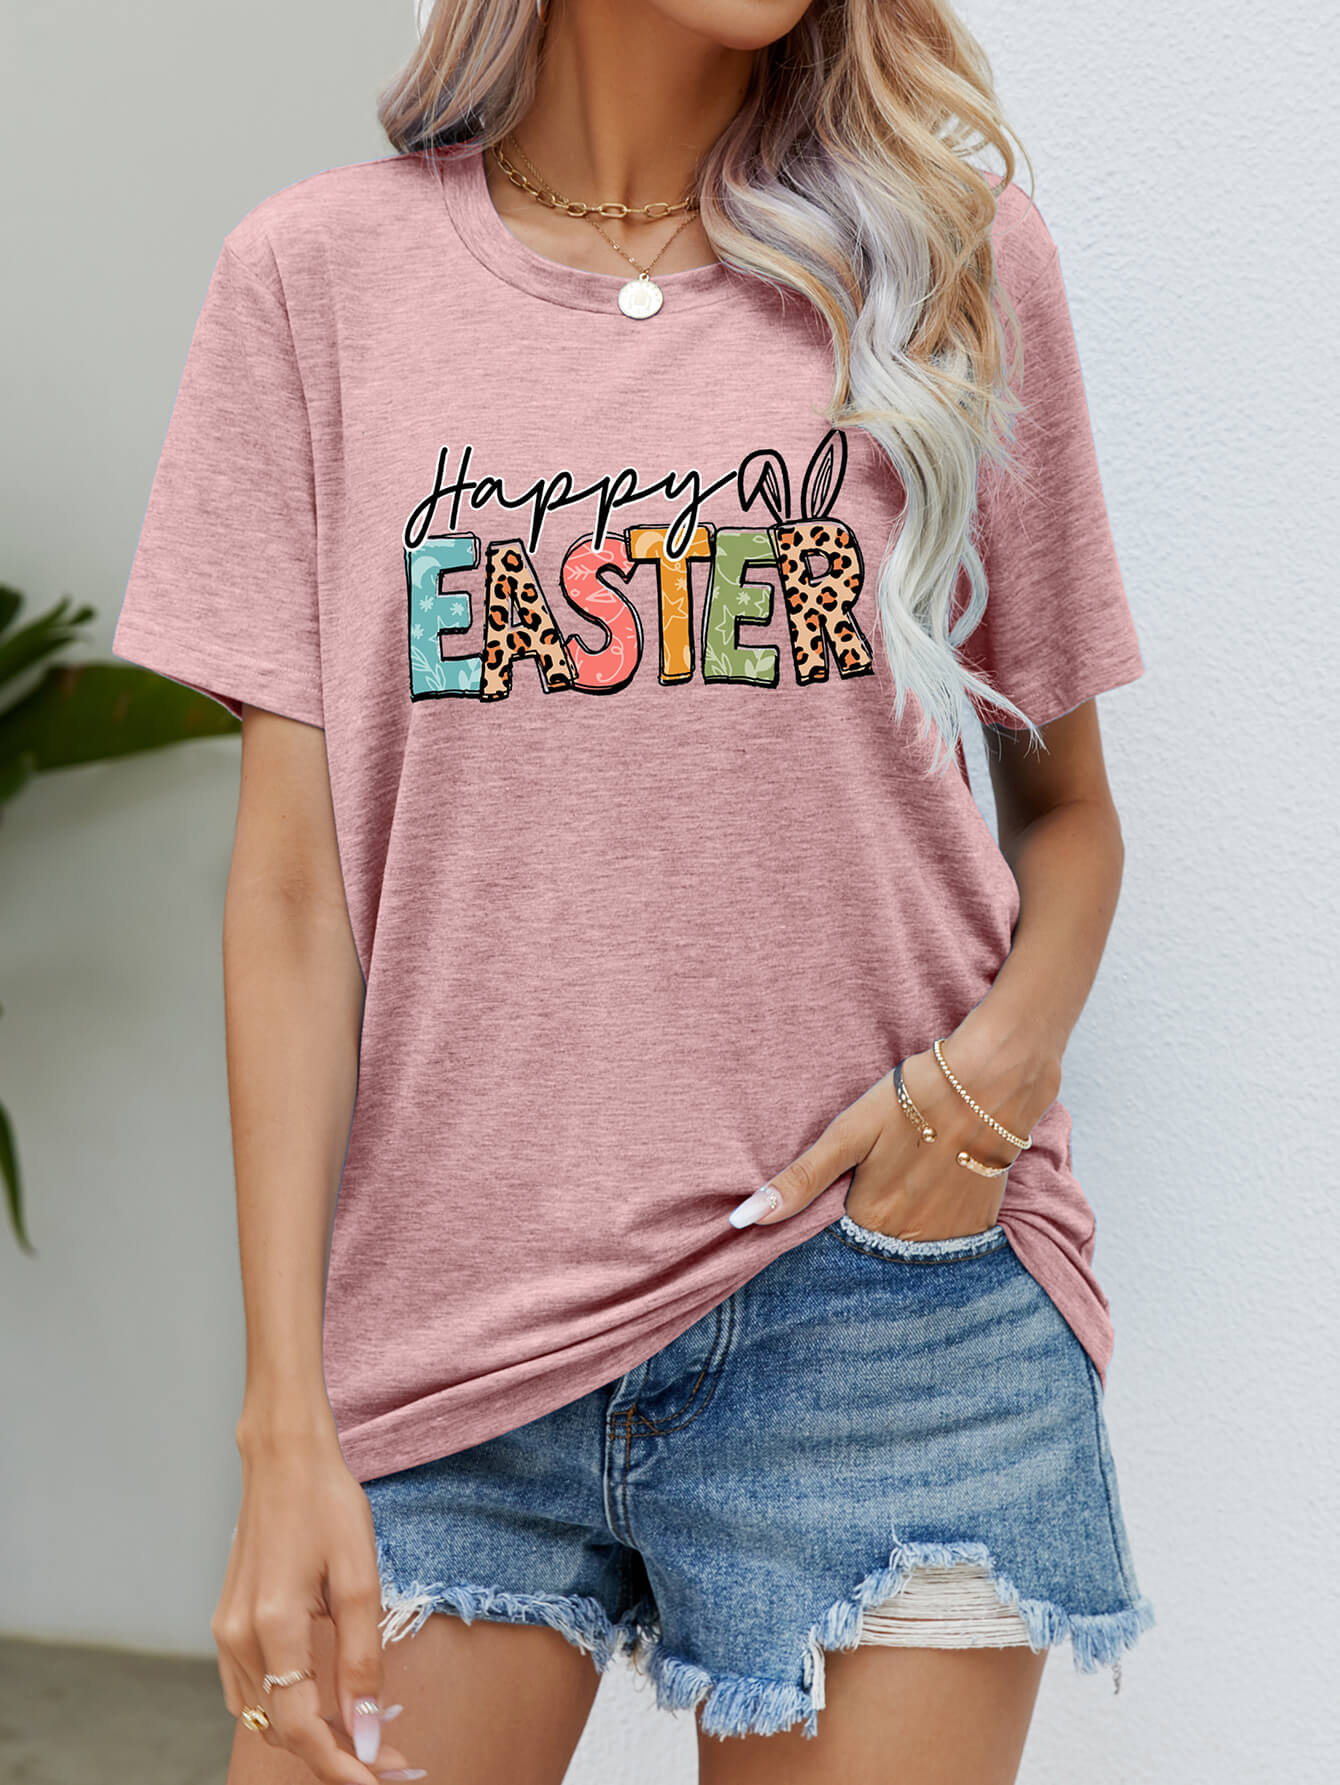 HAPPY EASTER Graphic Round Neck Tee Shirt